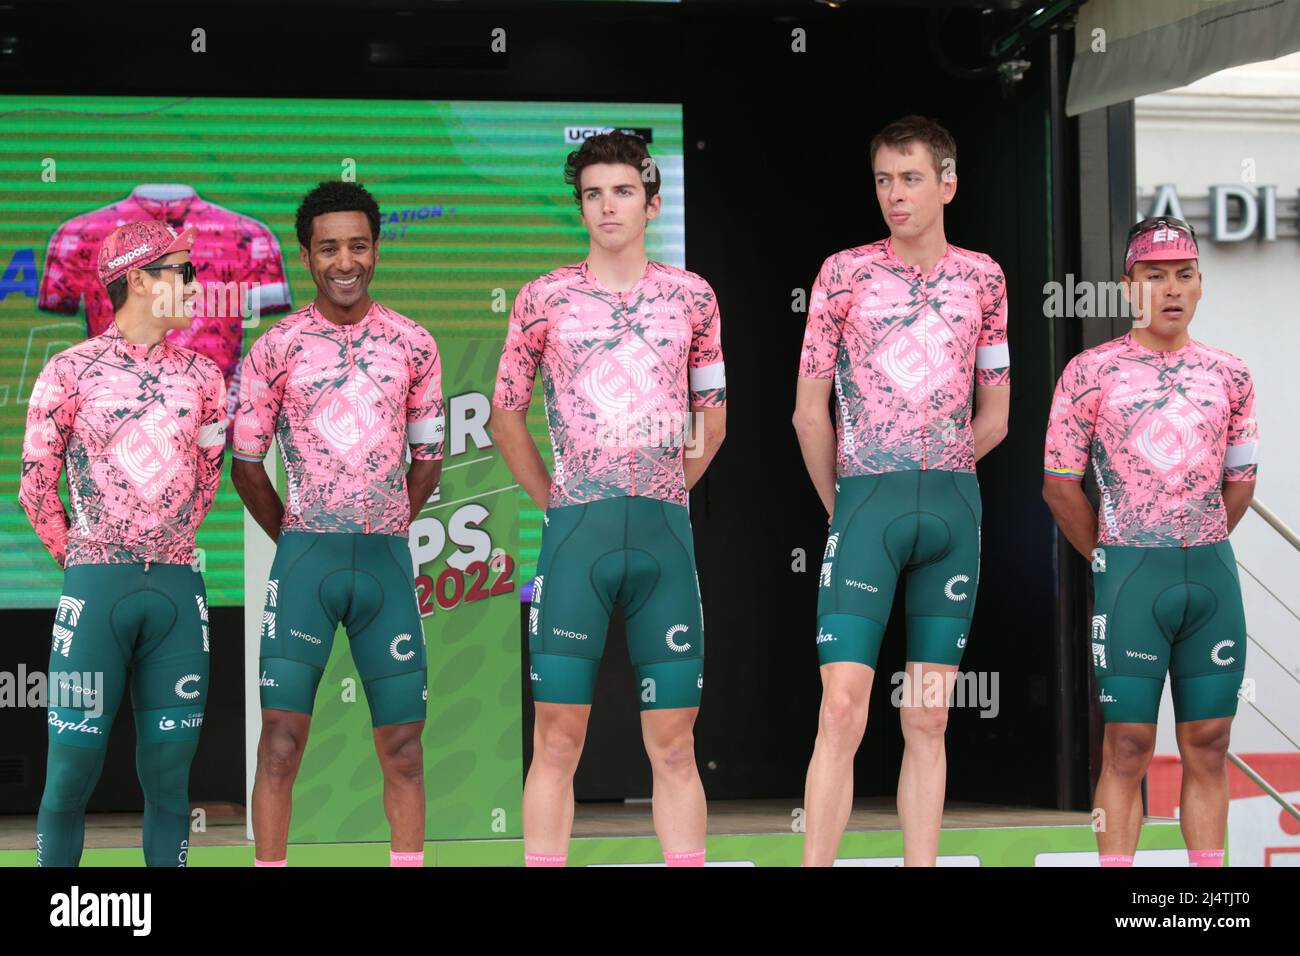 17th 4 2022; Cles, Italy; 2022 UCI Tour of the Alps., Team EF Education Easypost; Stock Photo